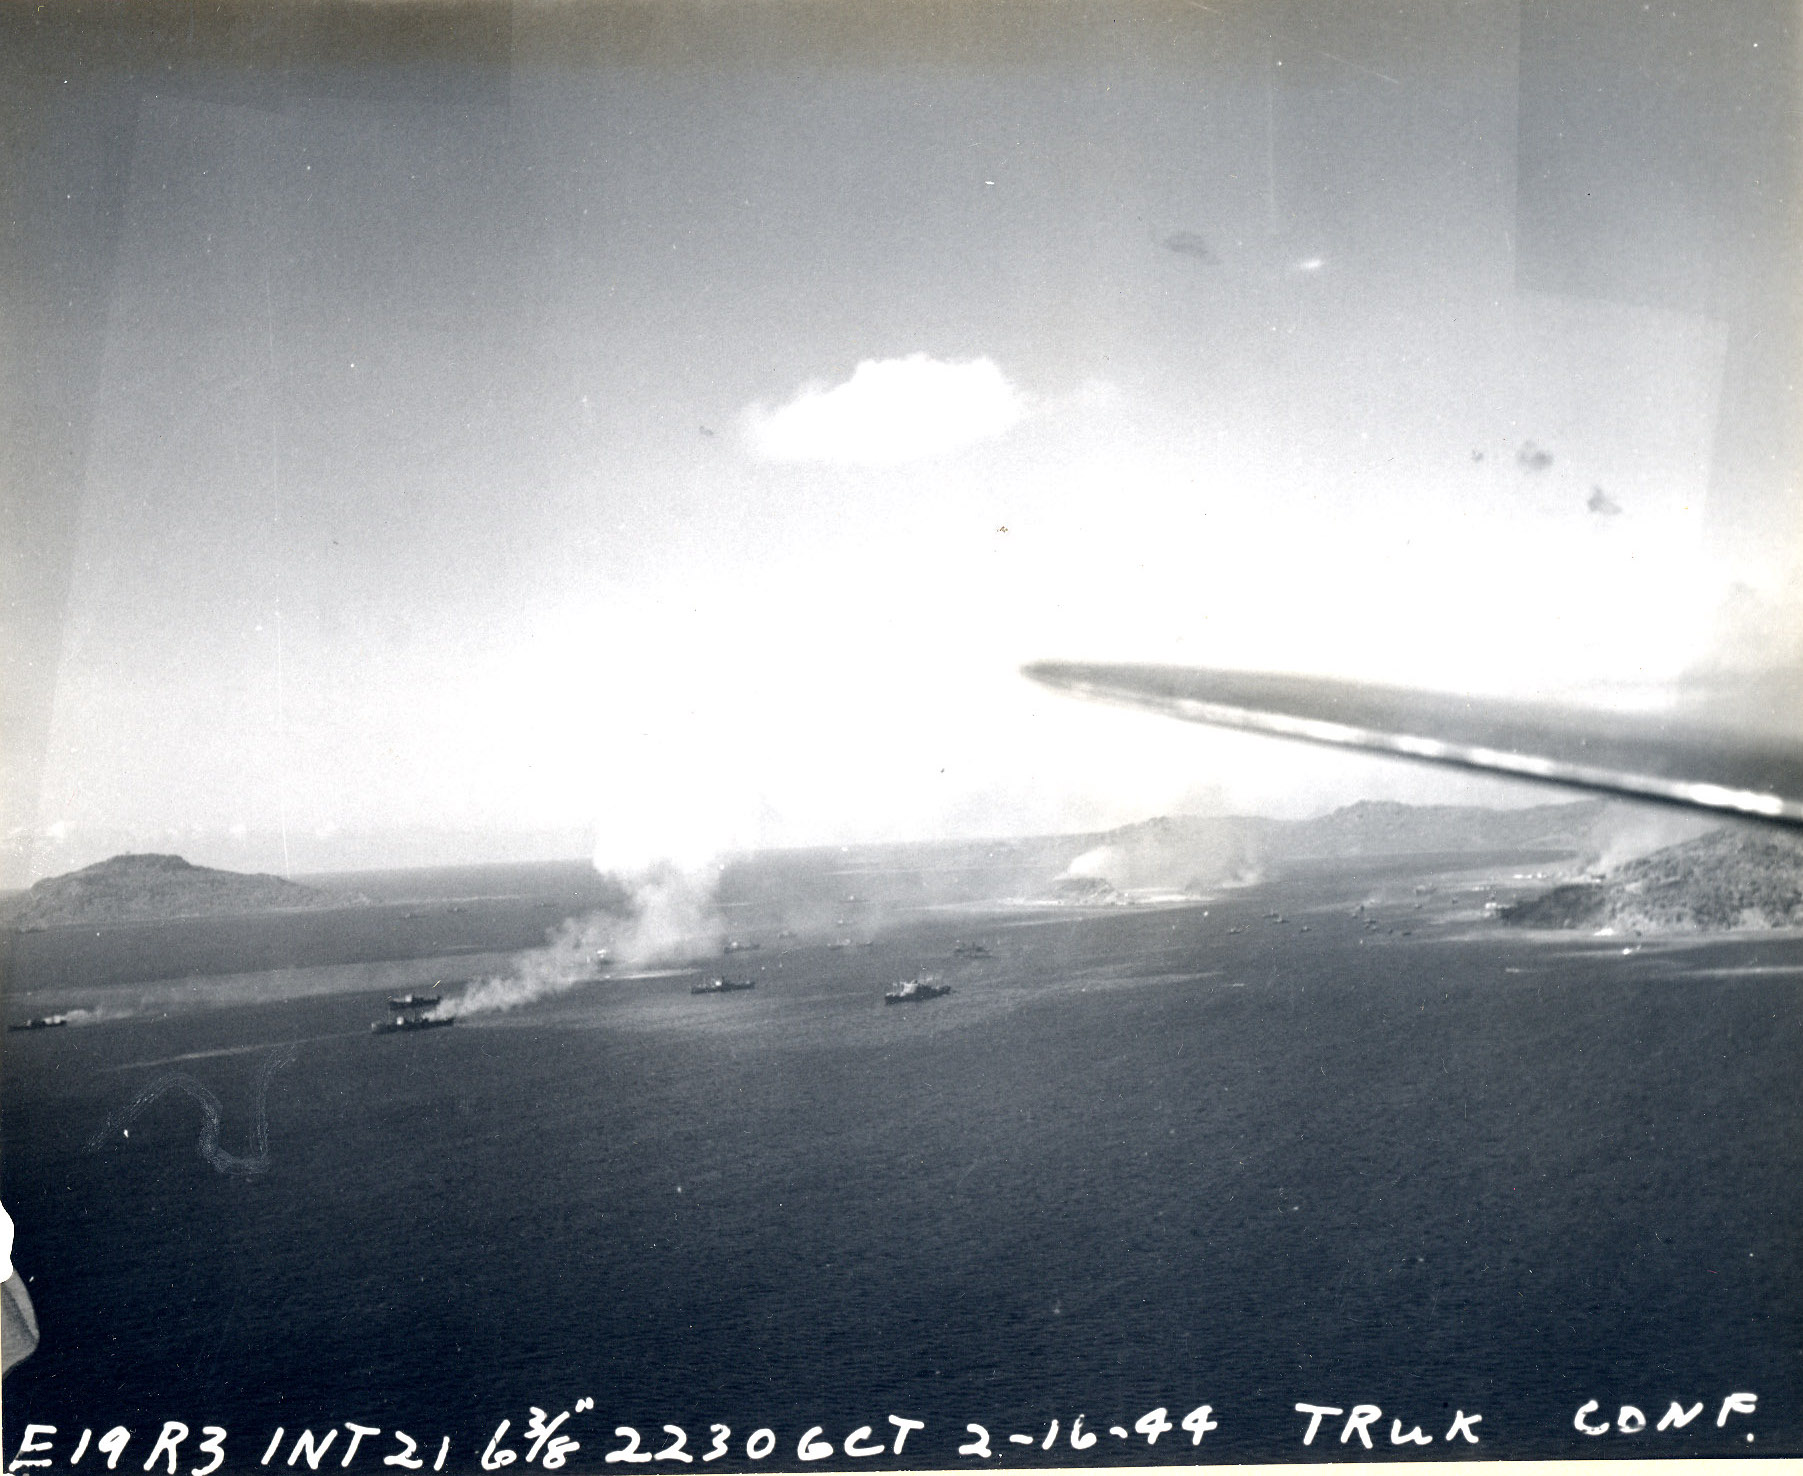 Japanese ammunition ships in Truk Harbor being attacked by dive bombers of USS Intrepid, Caroline Islands, 17 Feb 1944